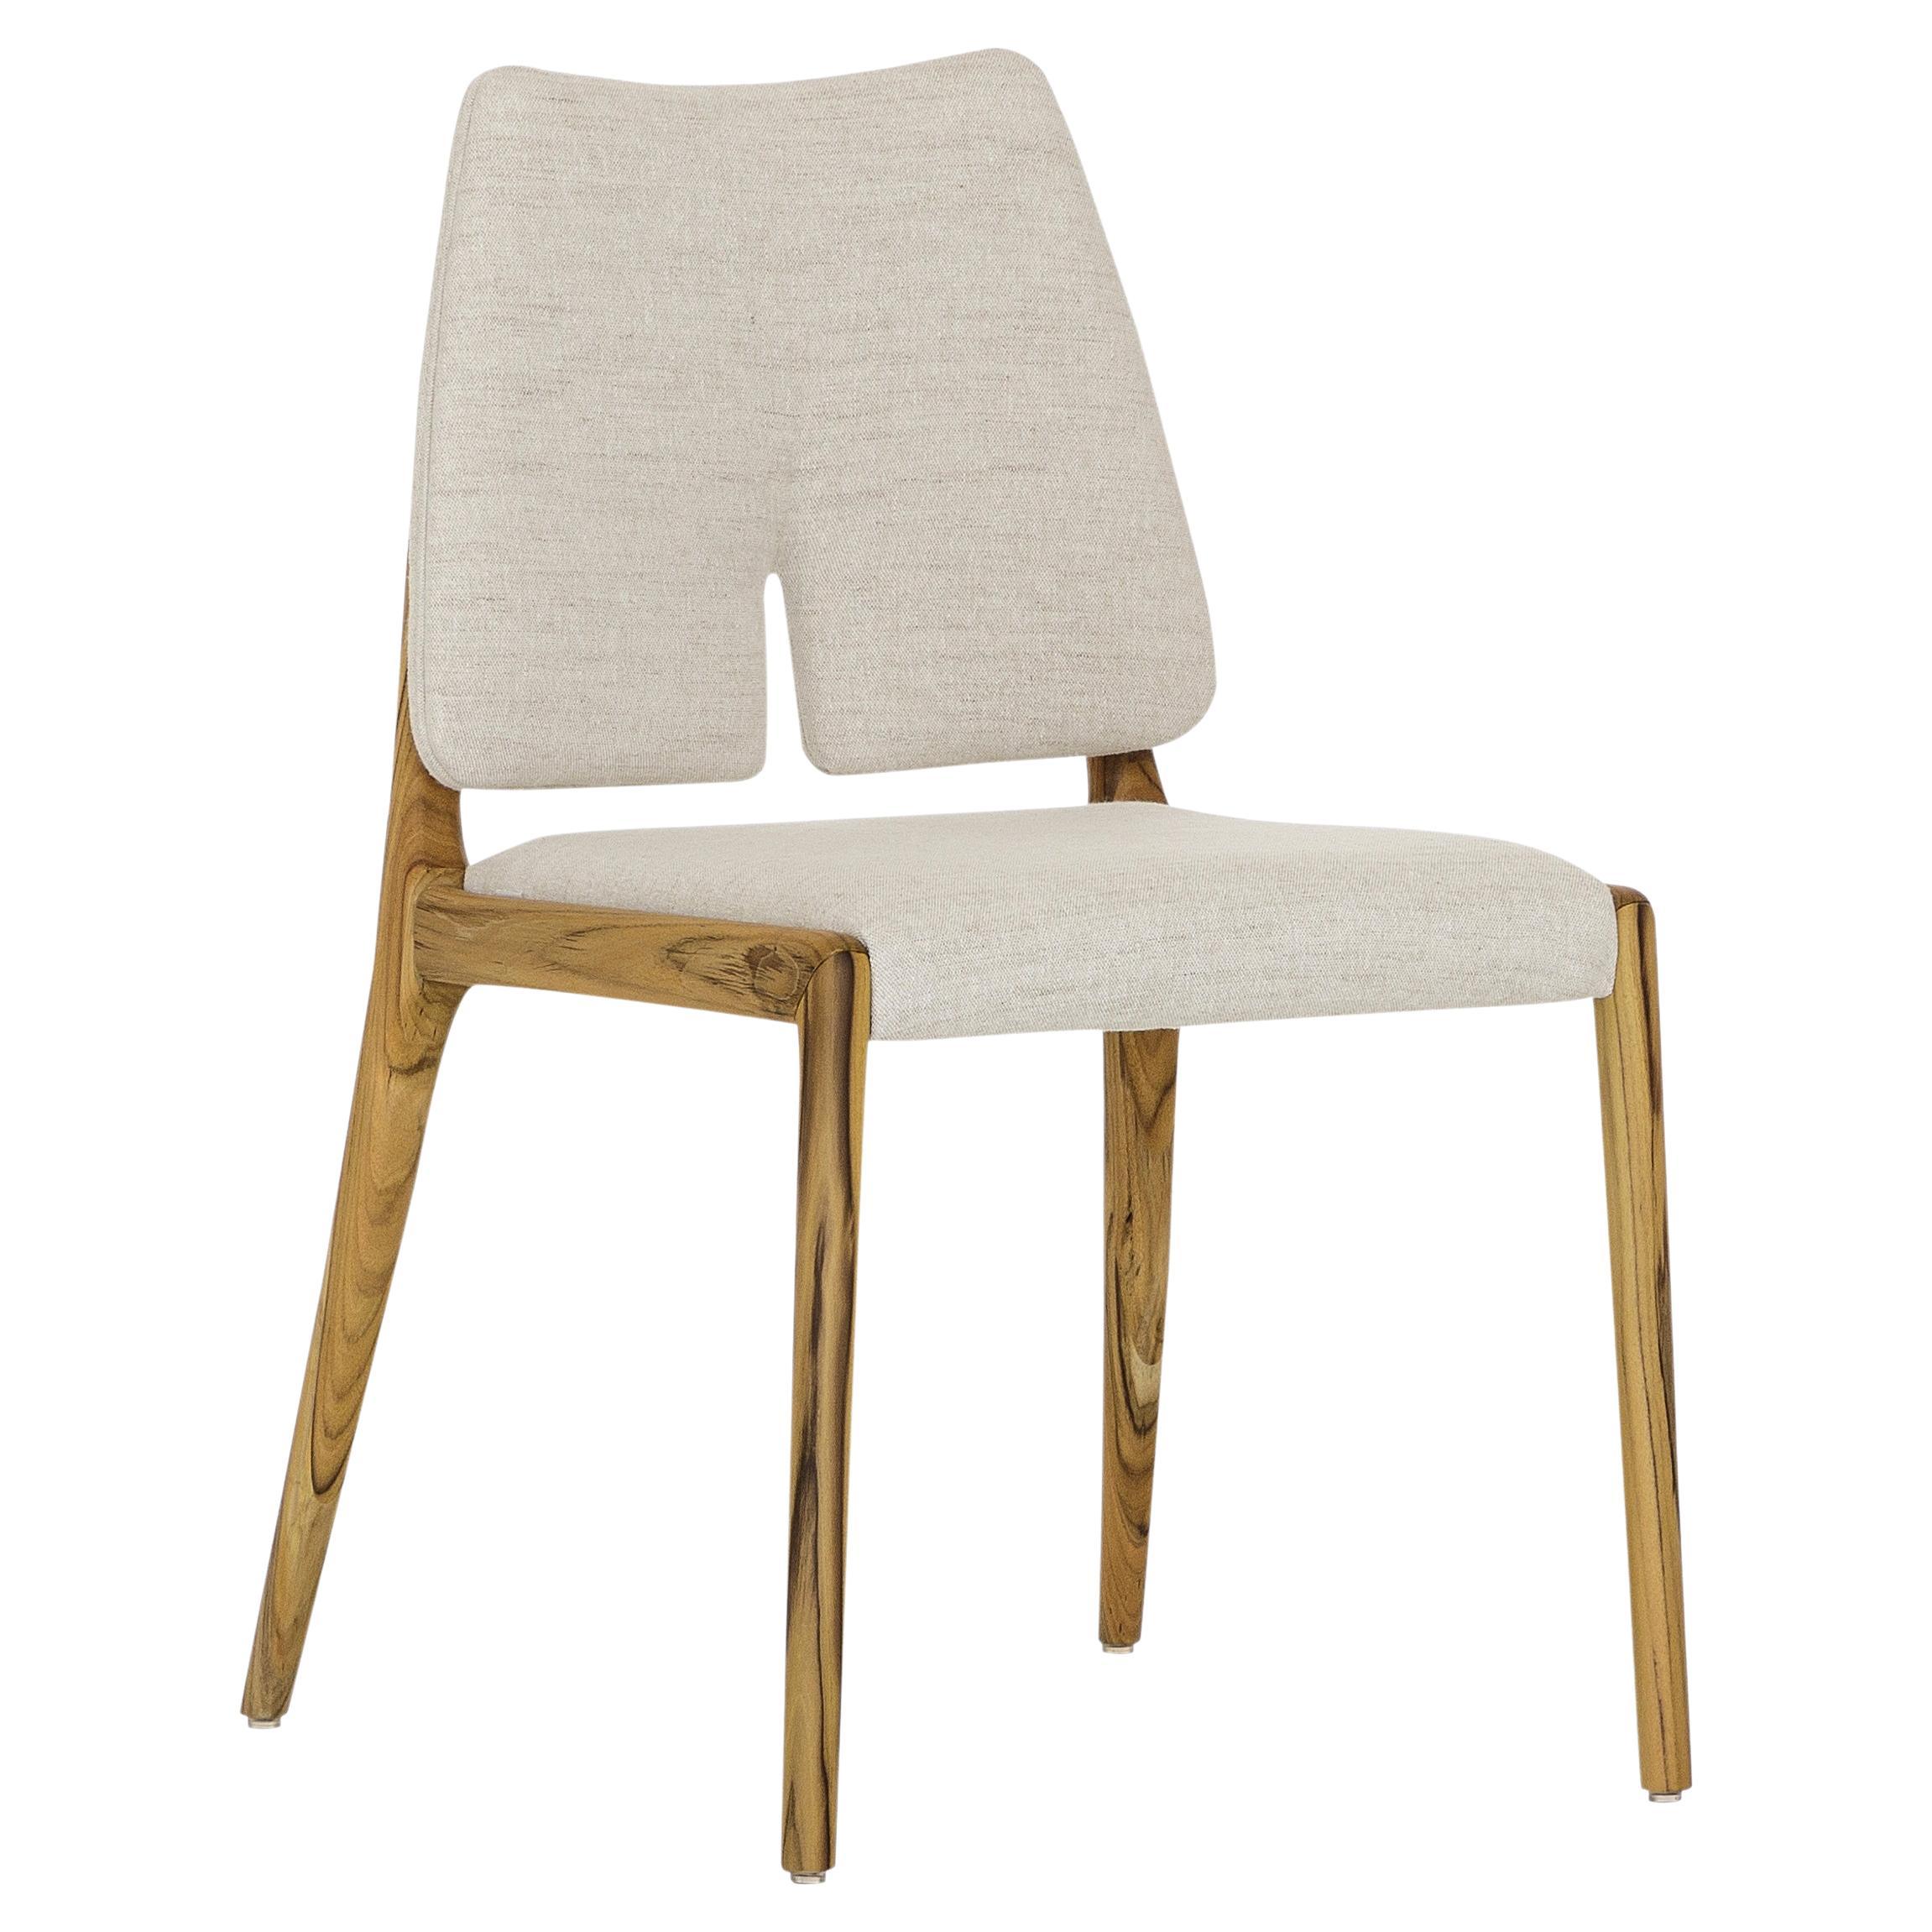 The creative team at Uultis created this dining room chair to embellish that family space with legs that are made of wood in a teak finish, combining it with a light beige cotton beautiful fabric. It is a chair designed to provide comfort and meant